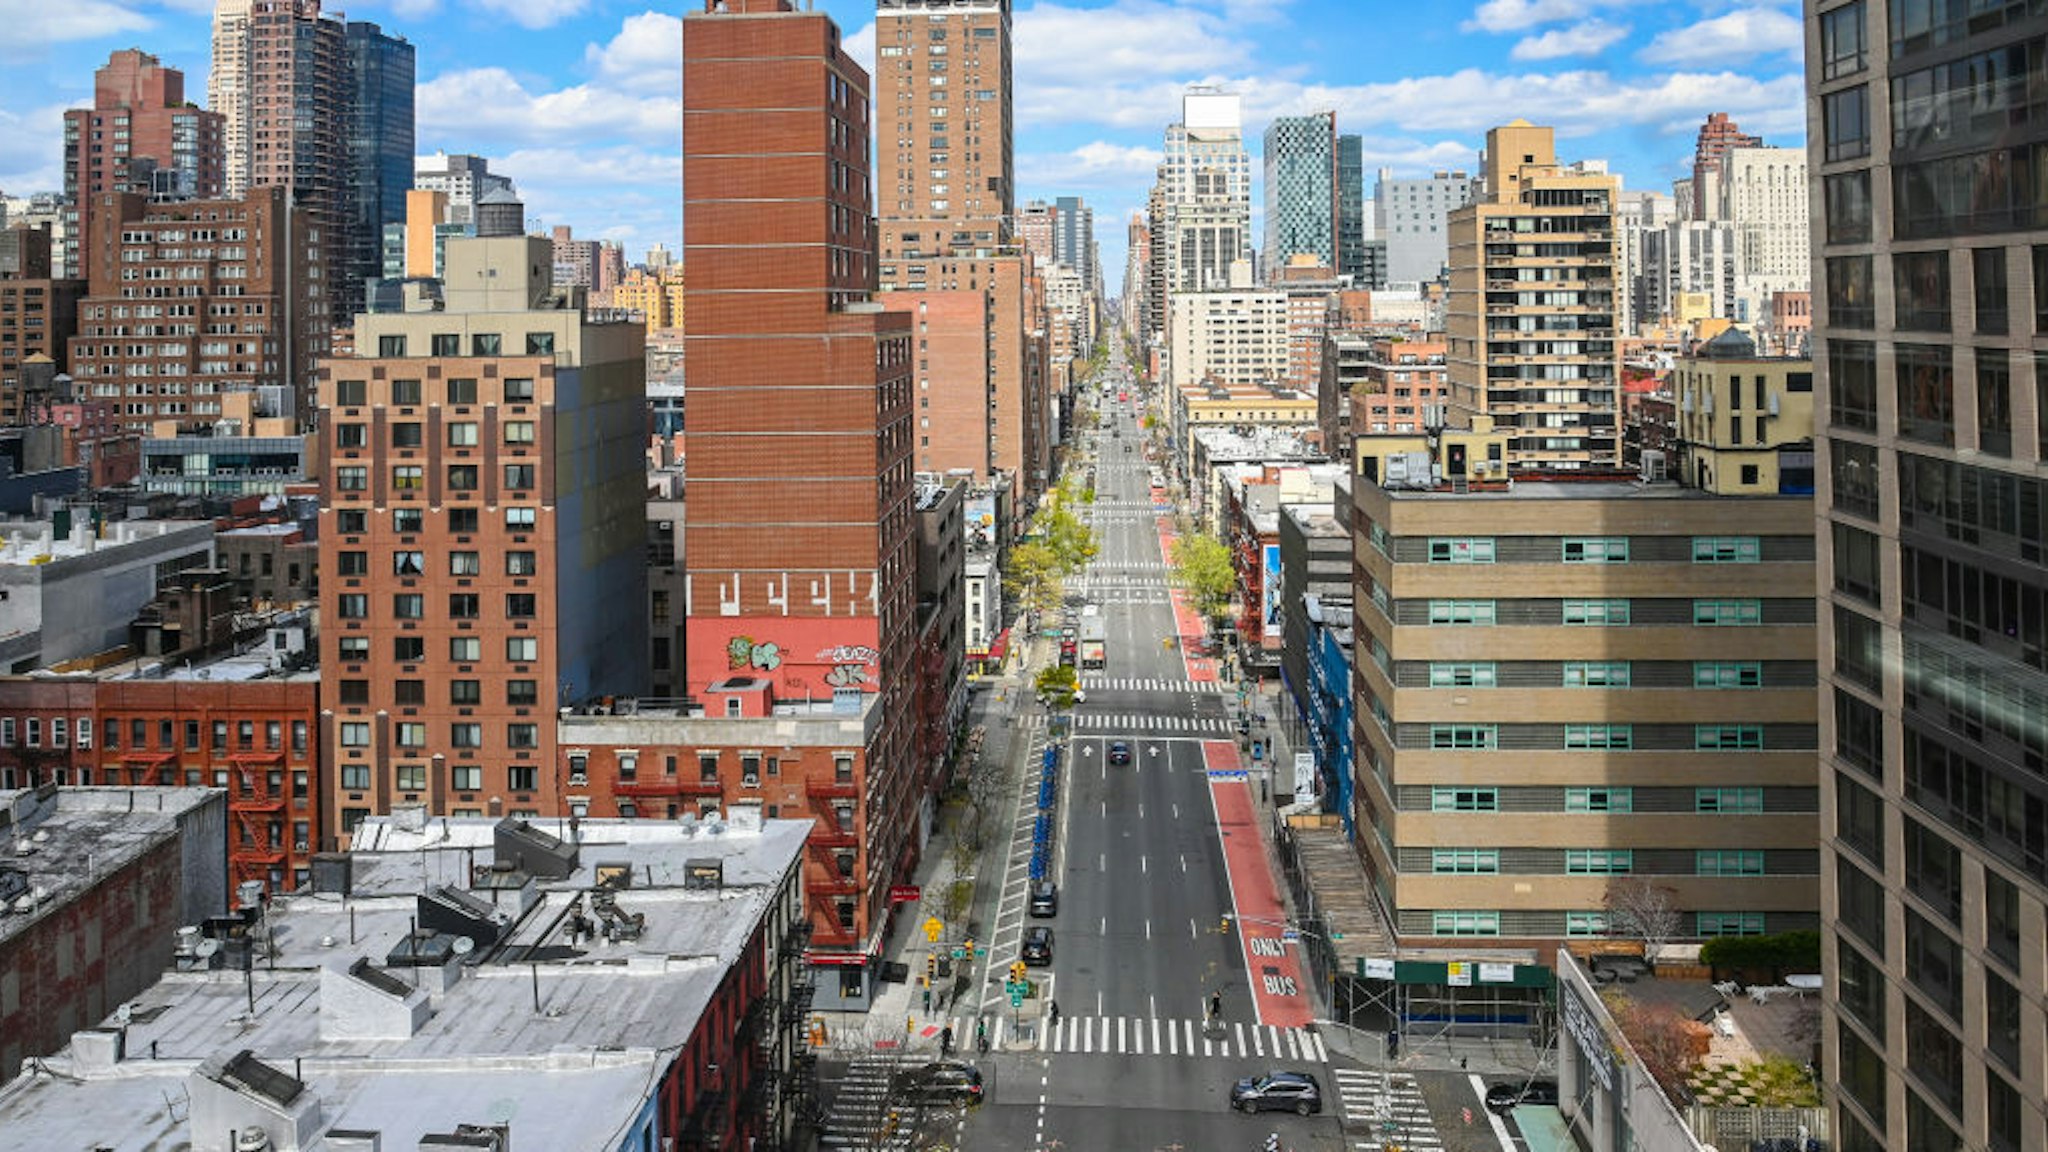 A view of nearly empty streets during the coronavirus pandemic on April 16, 2020 in New York City. COVID-19 has spread to most countries around the world, claiming over 140,000 lives lost with over 2 million infections reported. (Photo by Ben Gabbe/Getty Images)